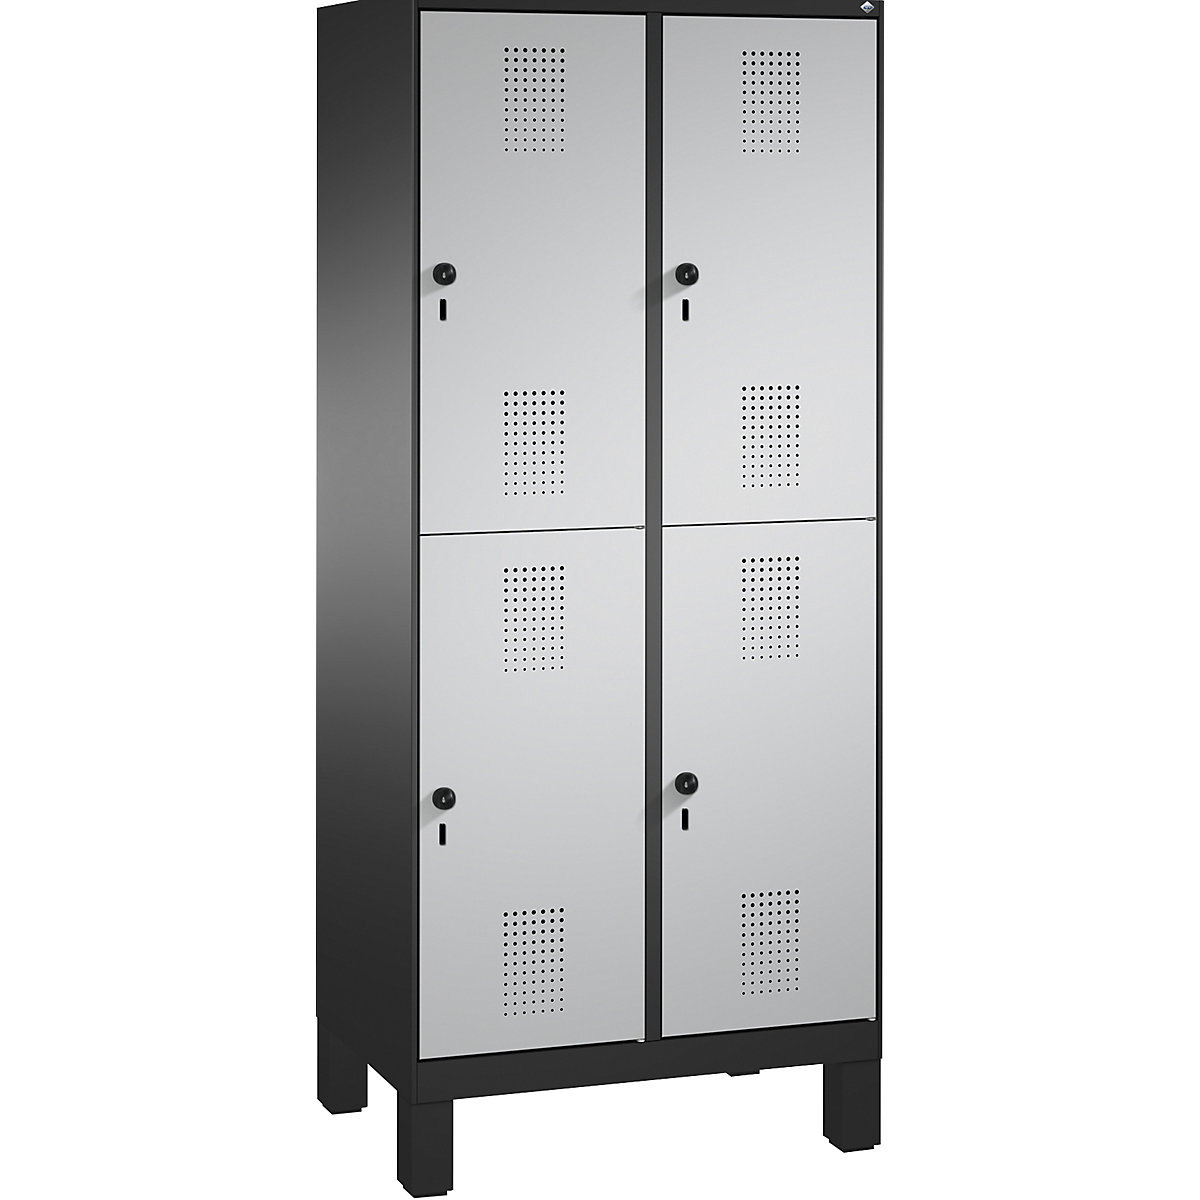 EVOLO cloakroom locker, double tier, with feet – C+P, 2 compartments, 2 shelf compartments each, compartment width 400 mm, black grey / white aluminium-4